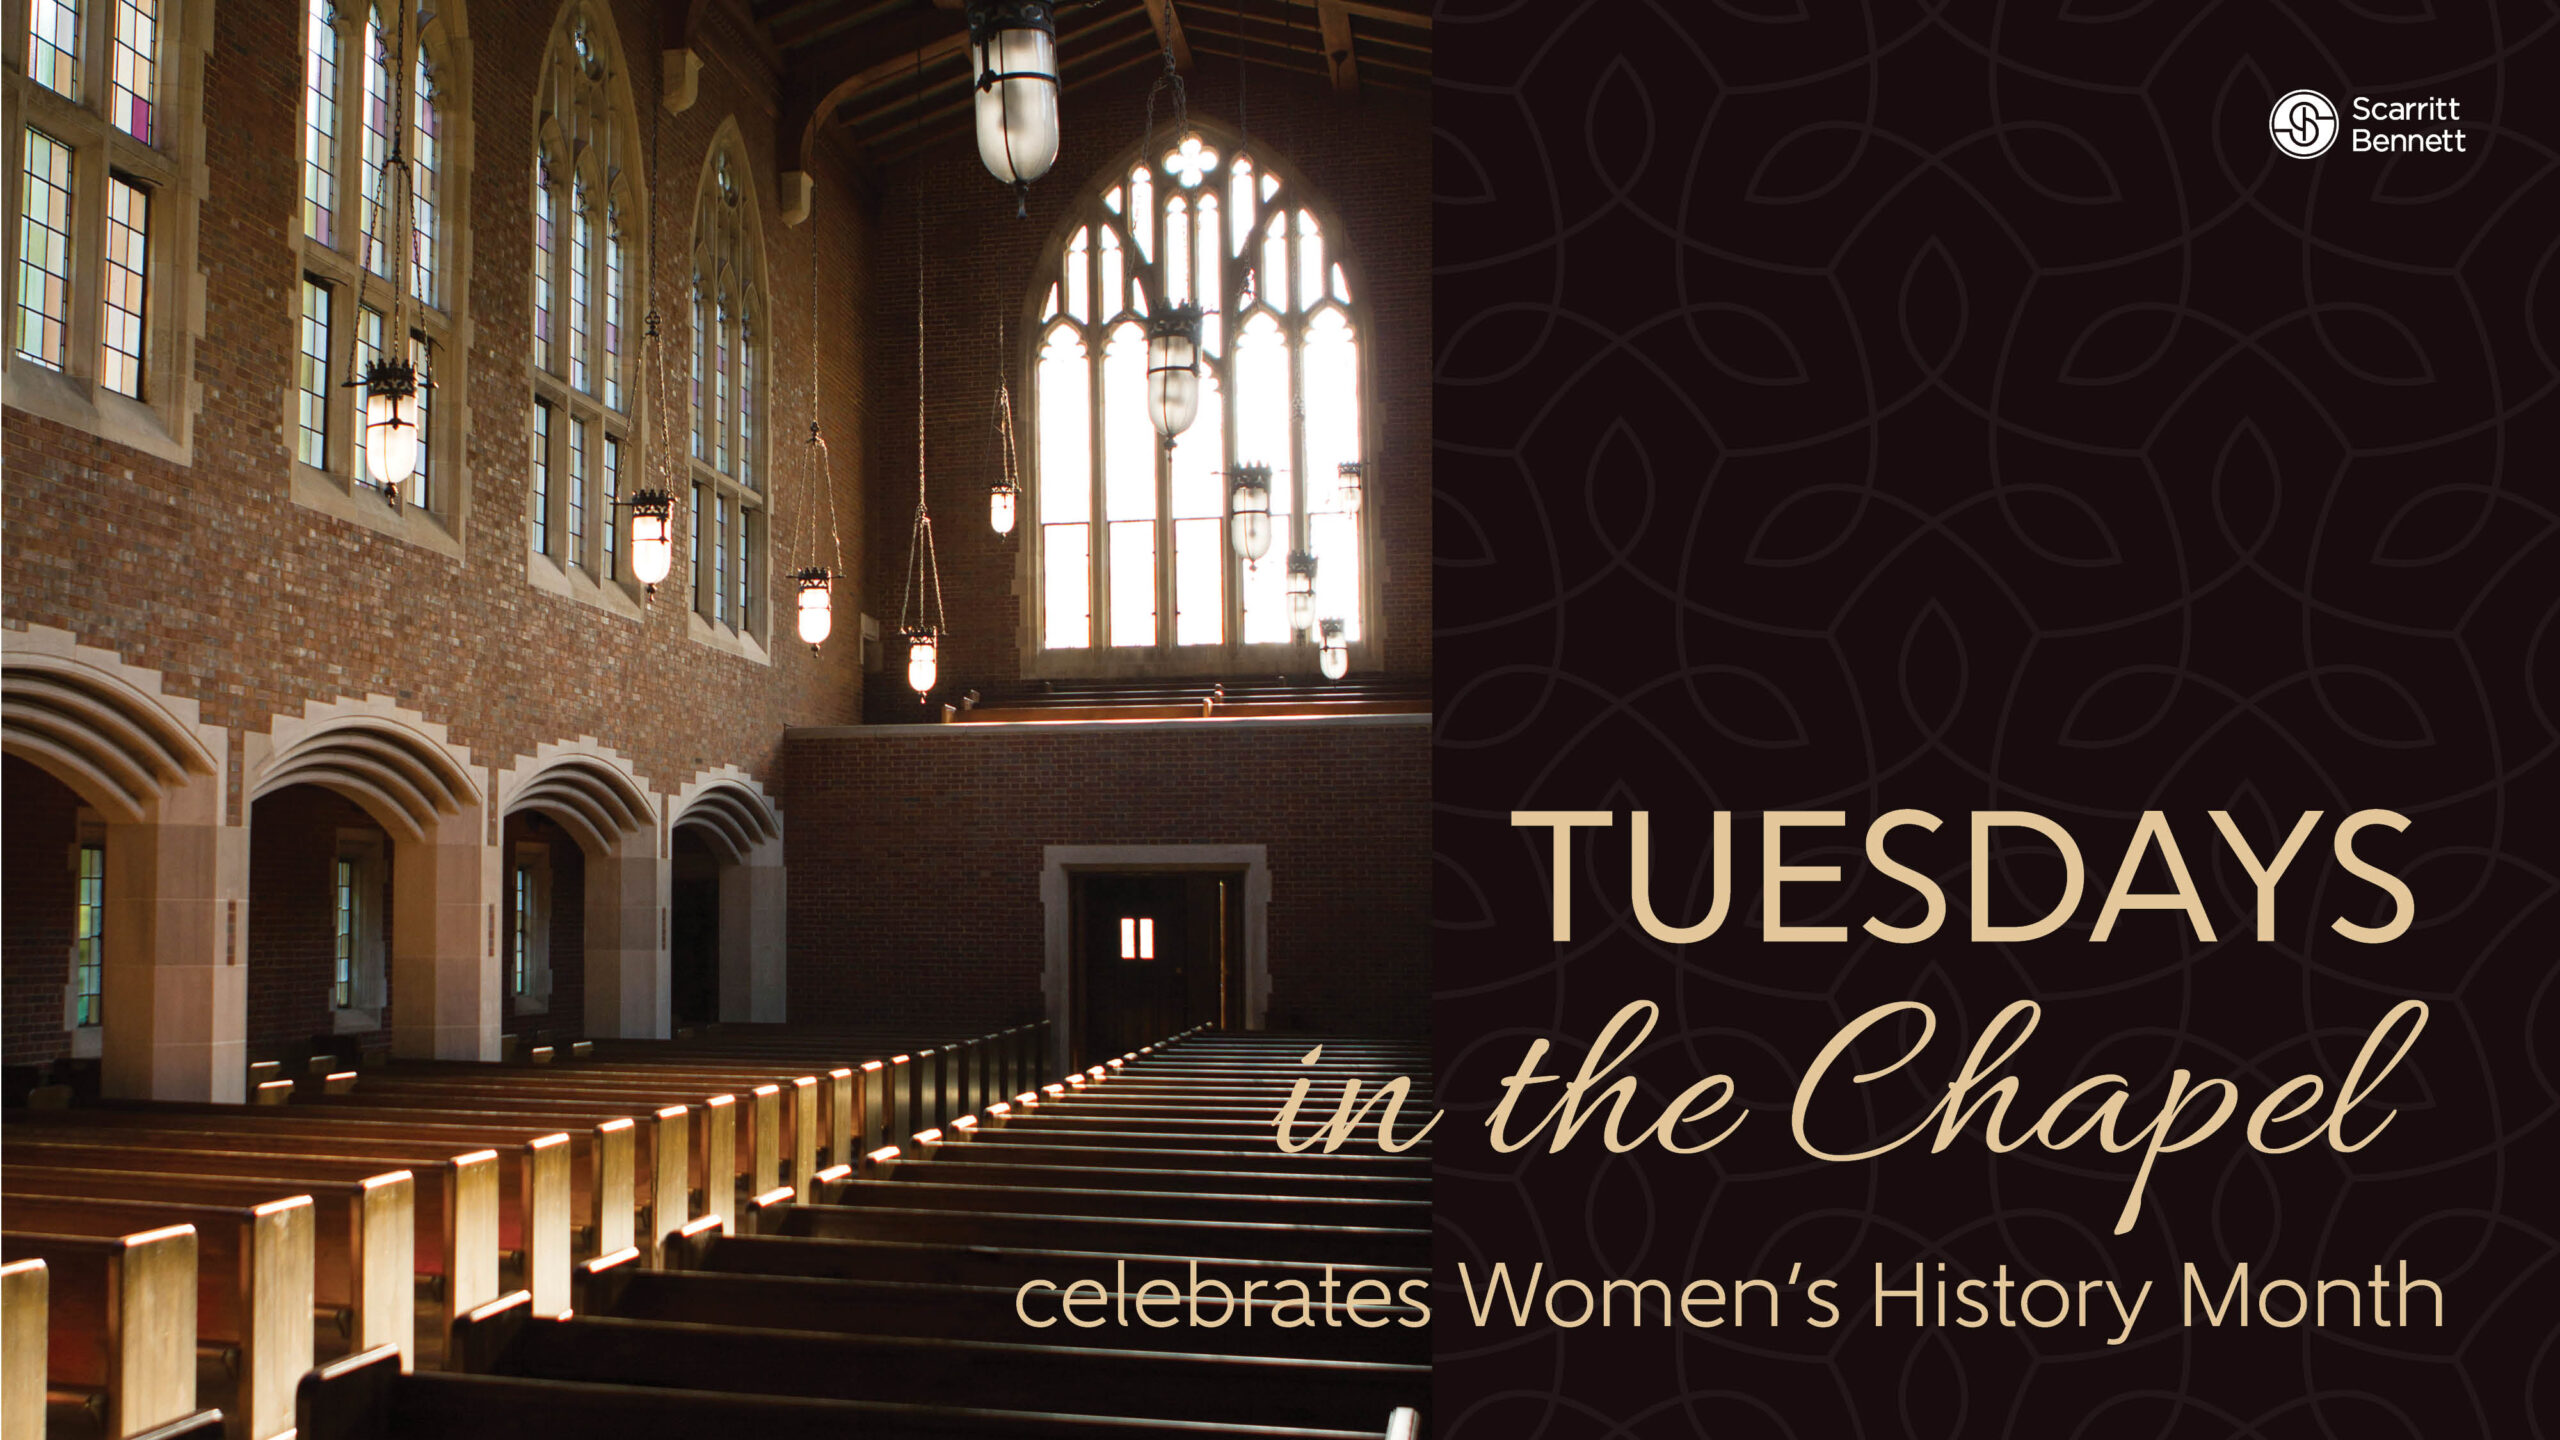 Tuesdays in the Chapel celebrates Women's History Month